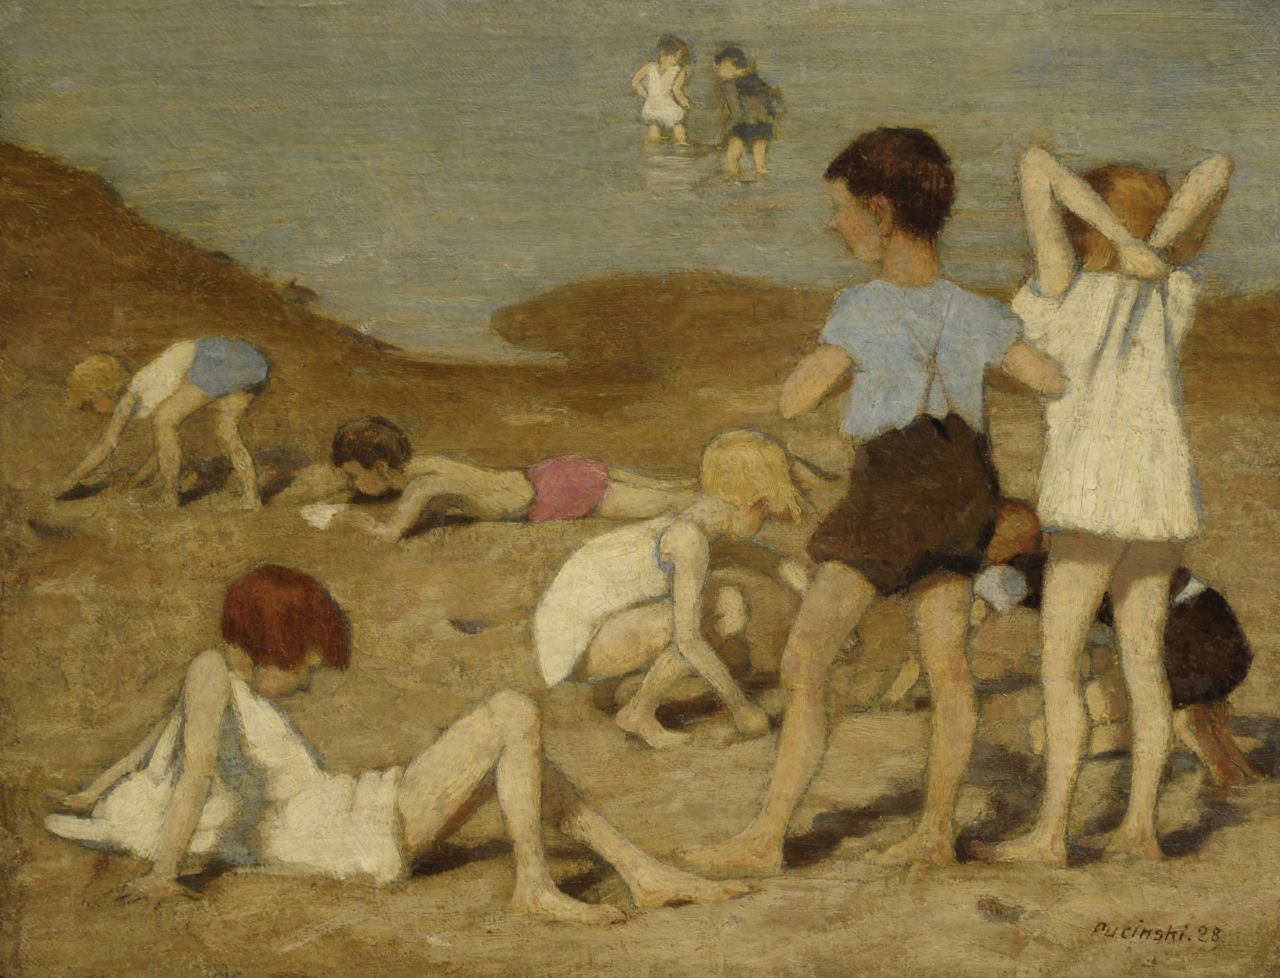 Pucinski V.  | Viktor Pucinski, Children at the beach, oil on canvas 35.9 x 45.8 cm, signed l.r. and dated '28